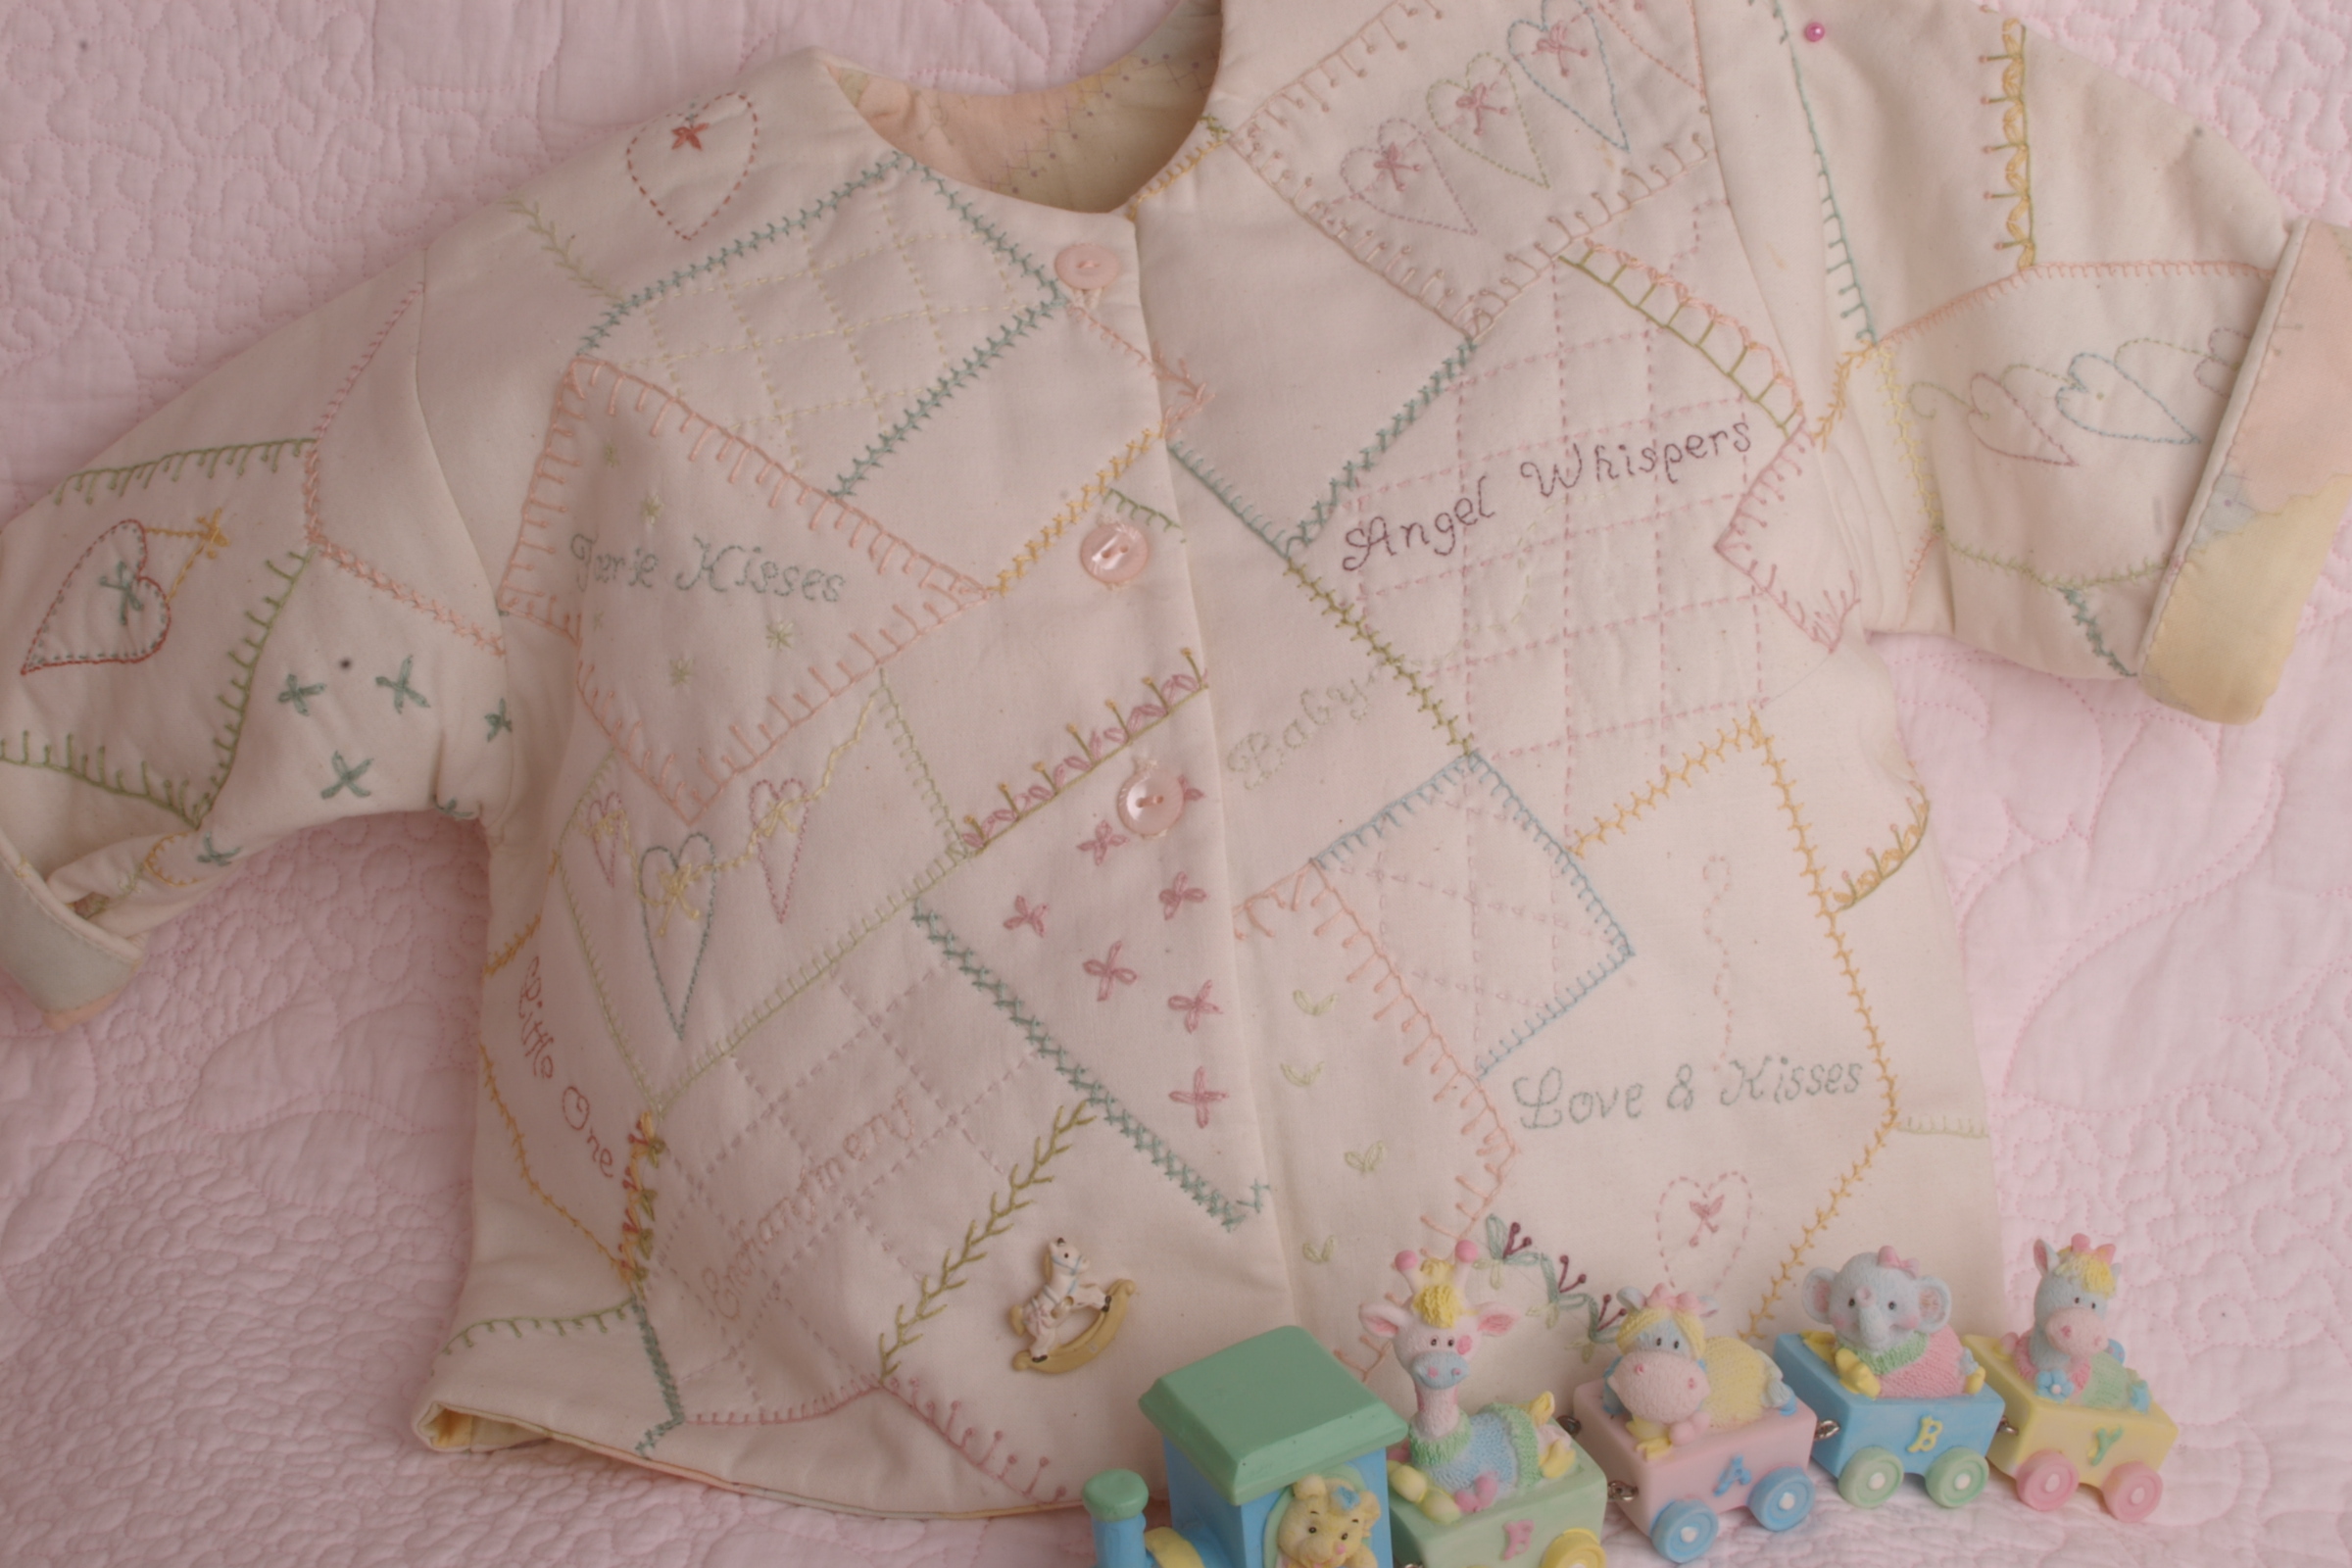 Faerie Kisses & Angel Wishes Stitched Jacket